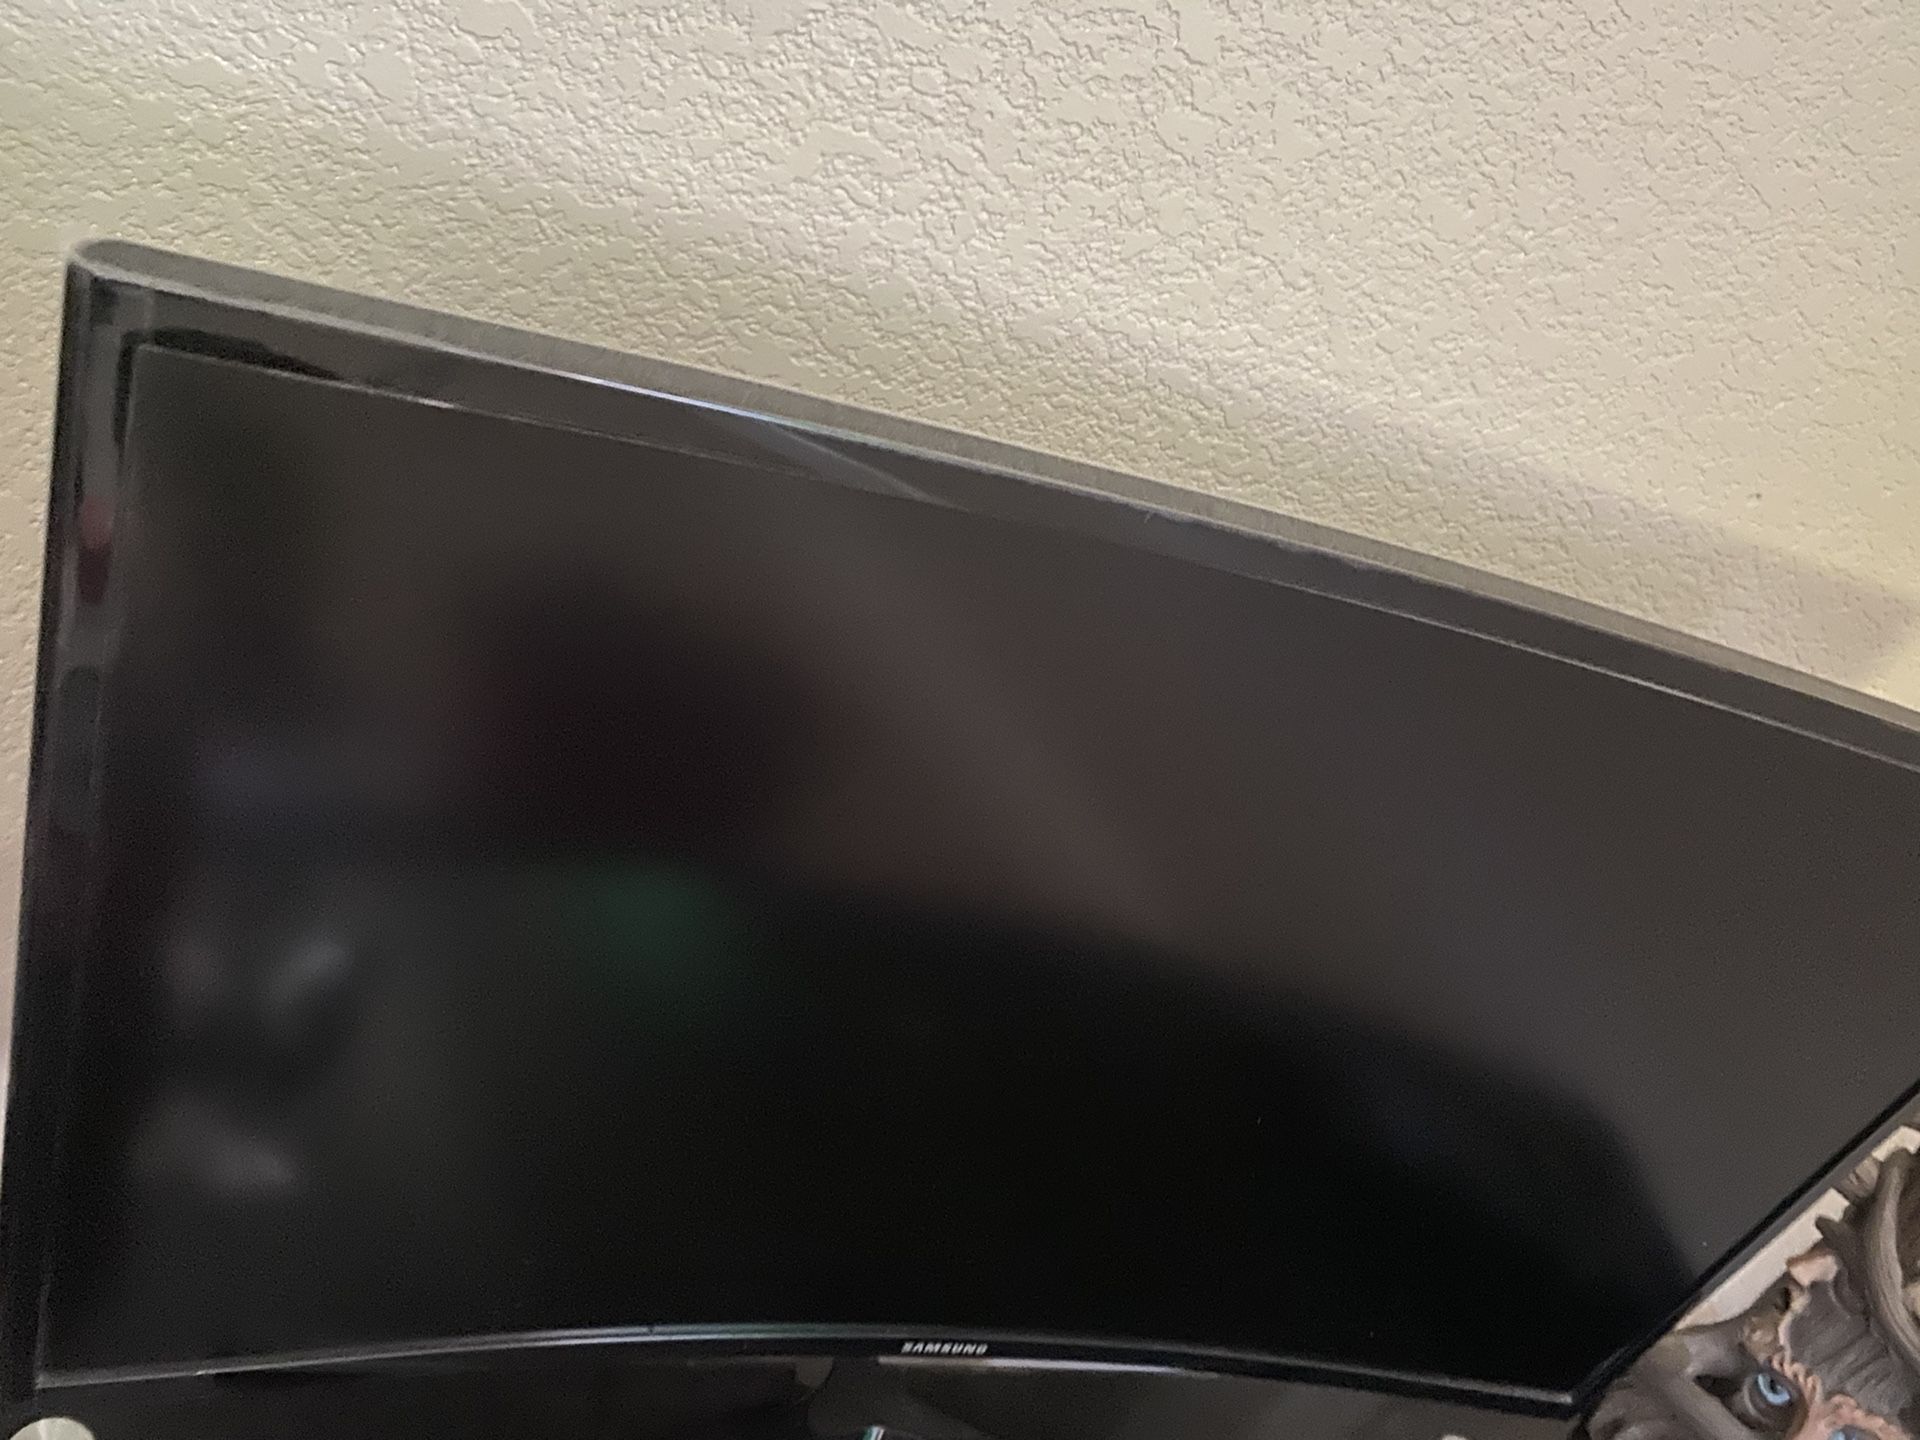 27" Samsung Curved LED Monitor